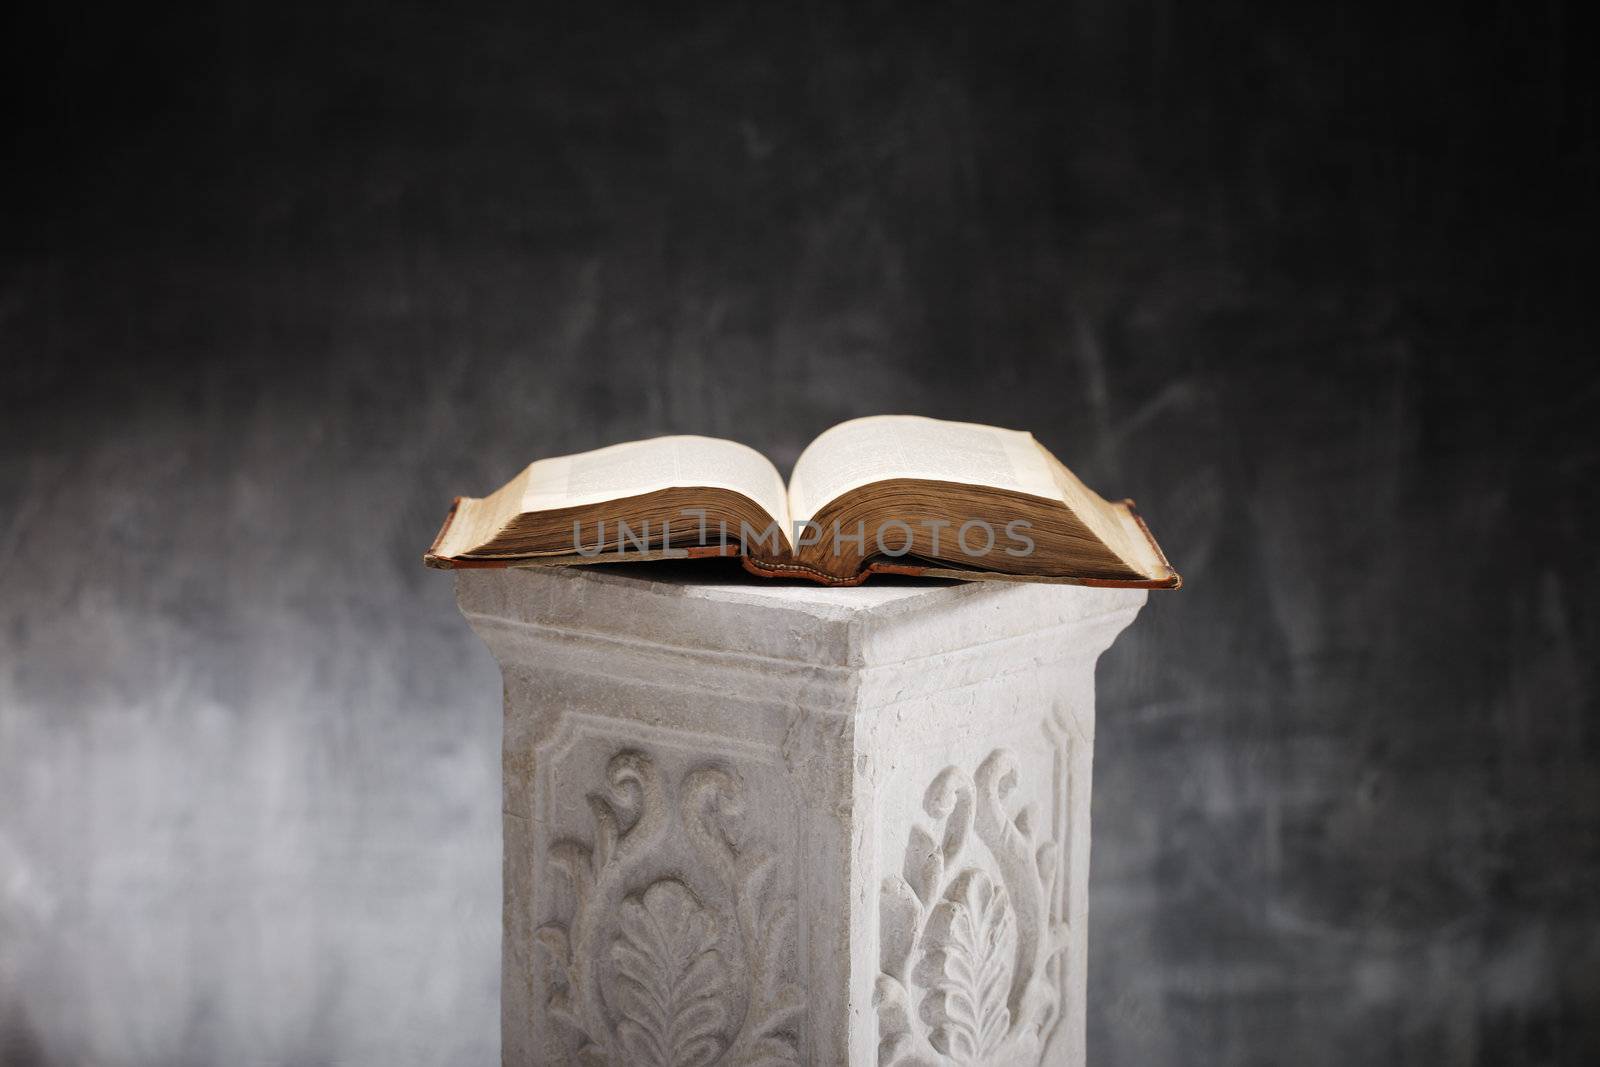 19th century antique book, opened on a decorative plaster column.